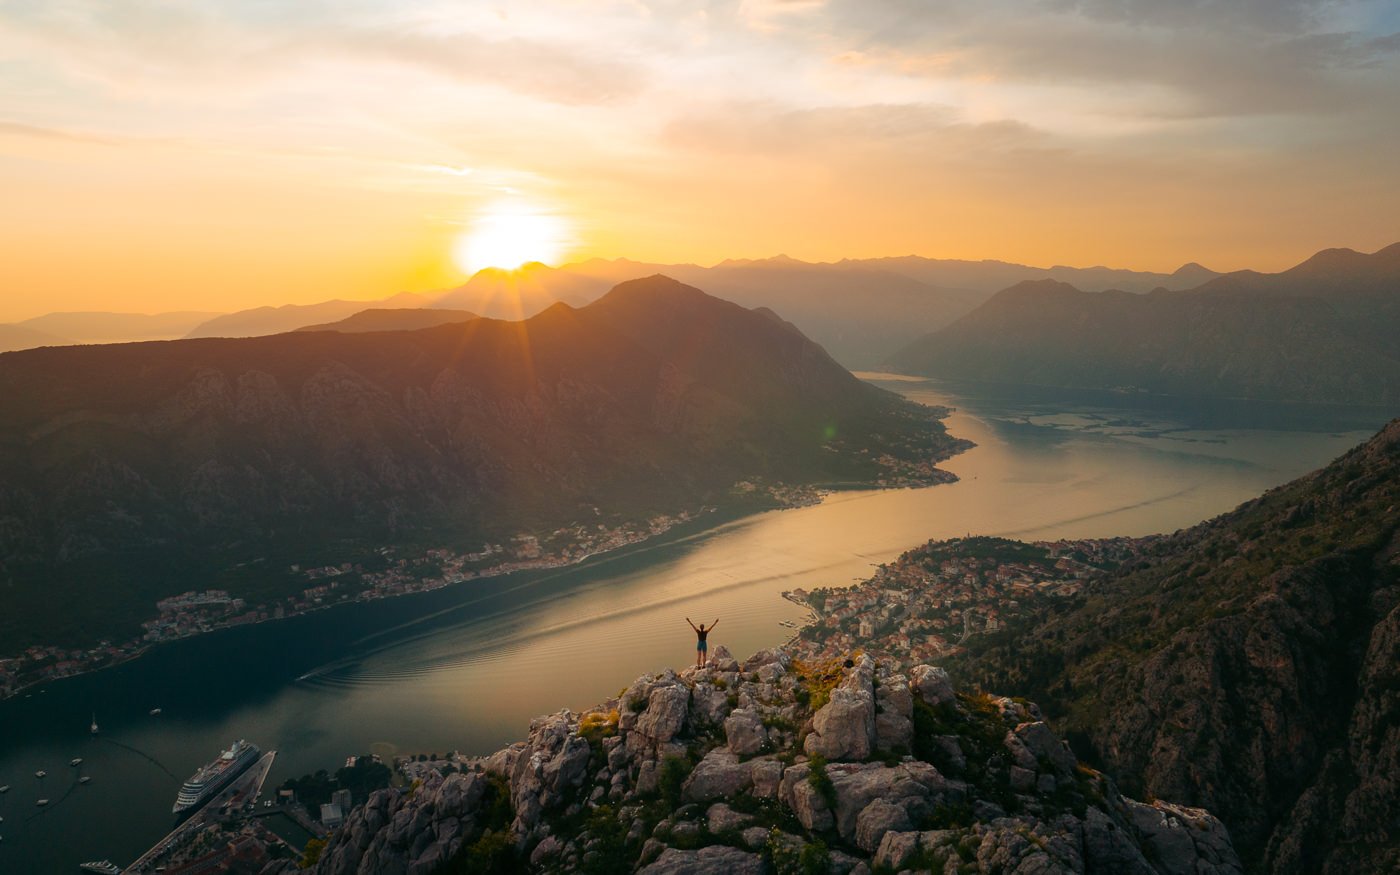 Ladder of Kotor viewpoint during sunset